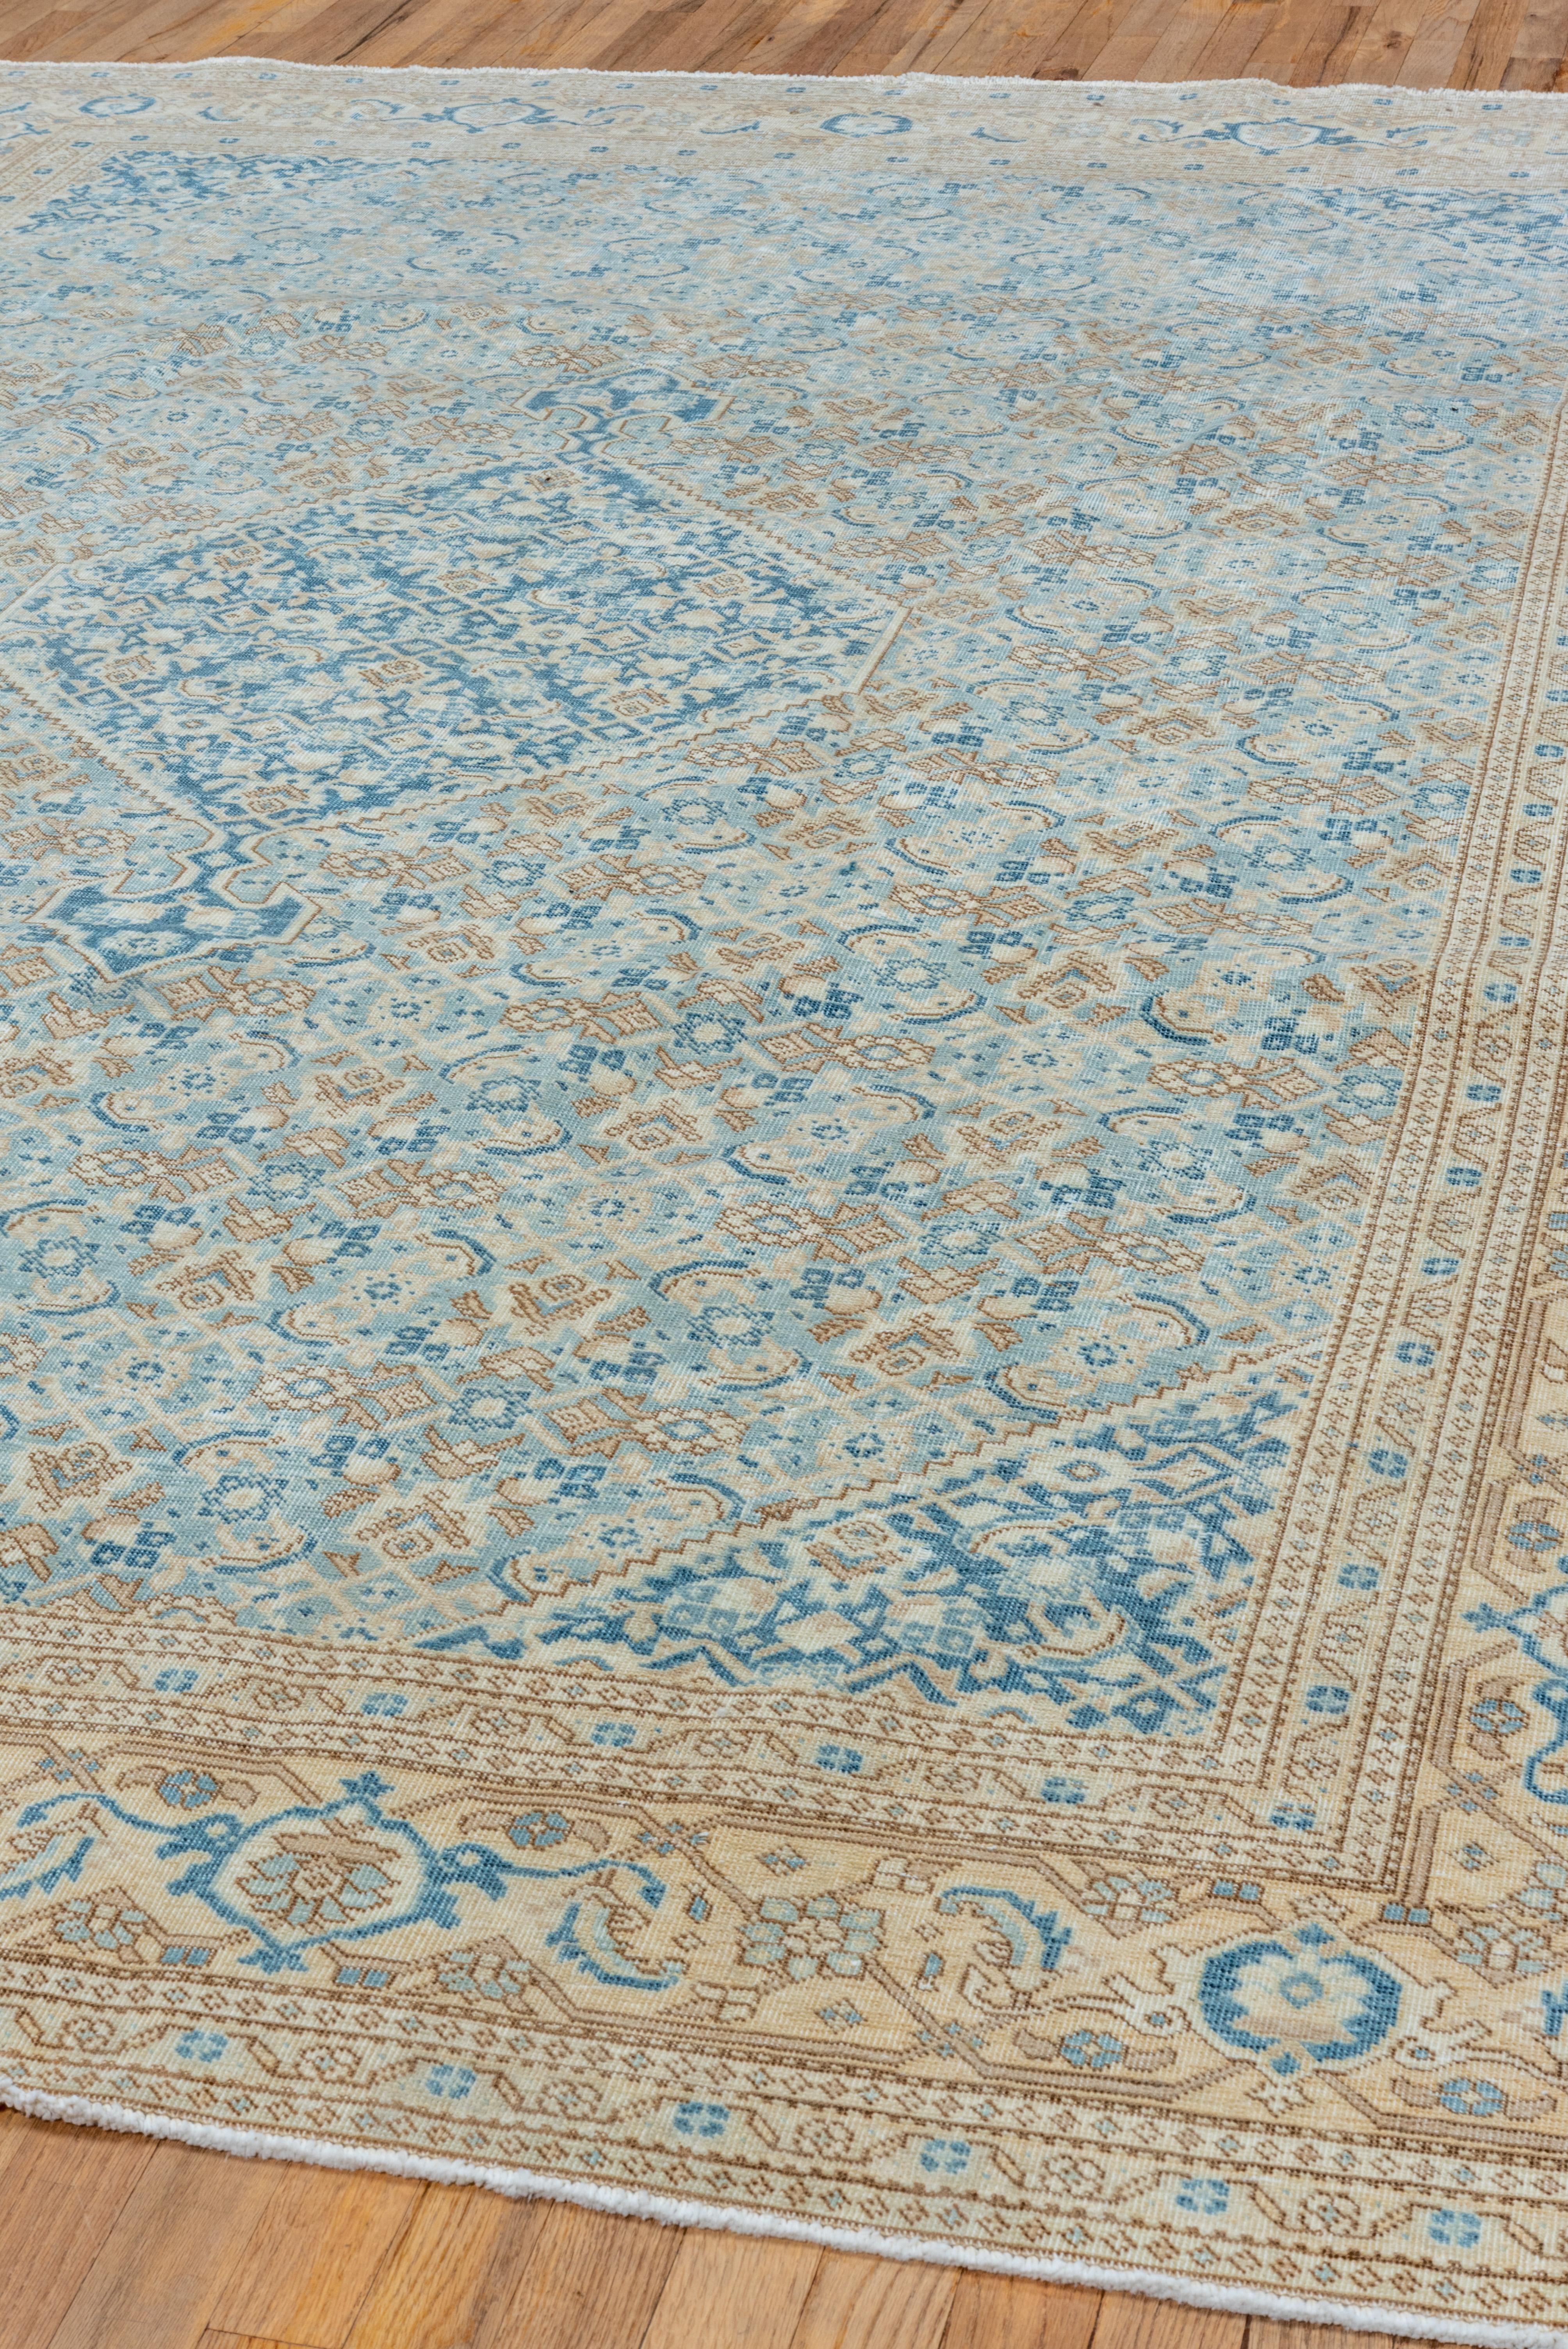 Hand-Knotted Antique Persian Tabriz Rug, Light Blue Herati Field, Innter Royal blue Medallion For Sale